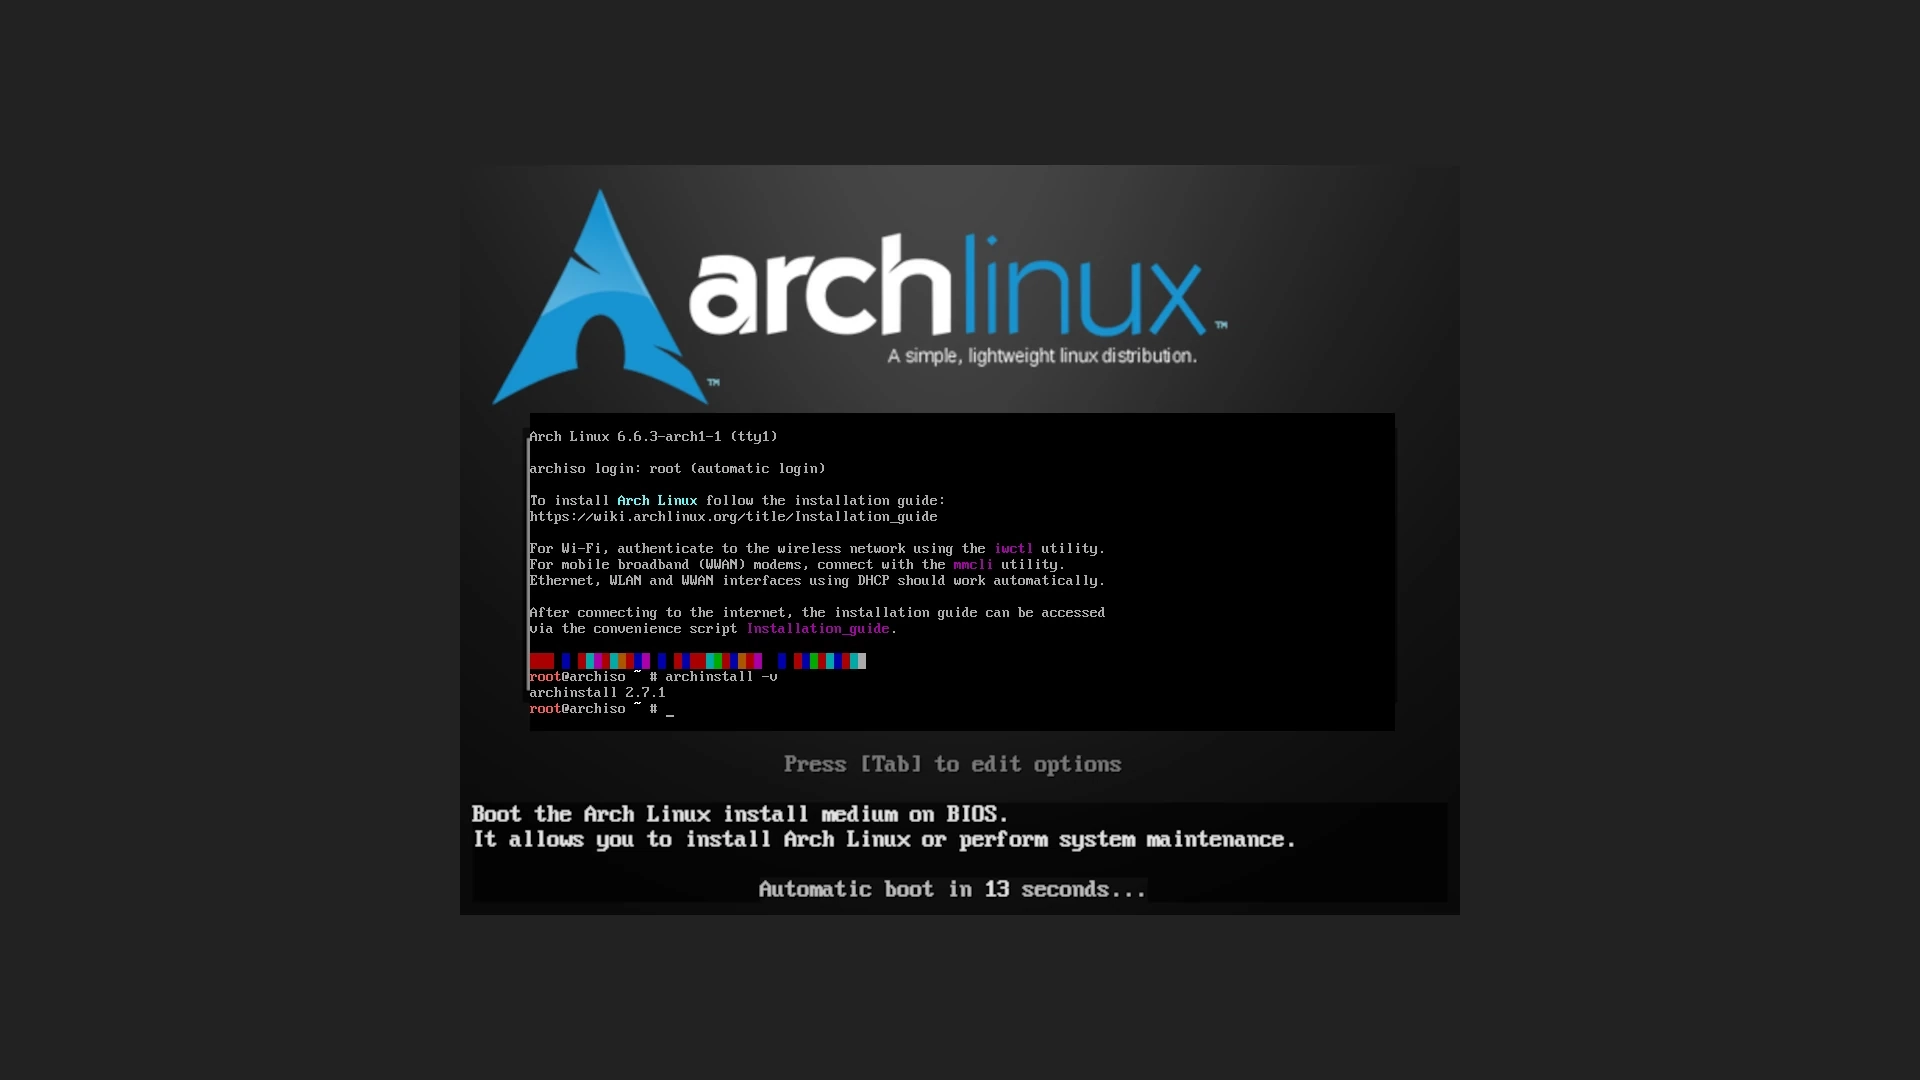 December 2023 ISO Release of Arch Linux Features Linux 6.6 LTS and an Updated Installer